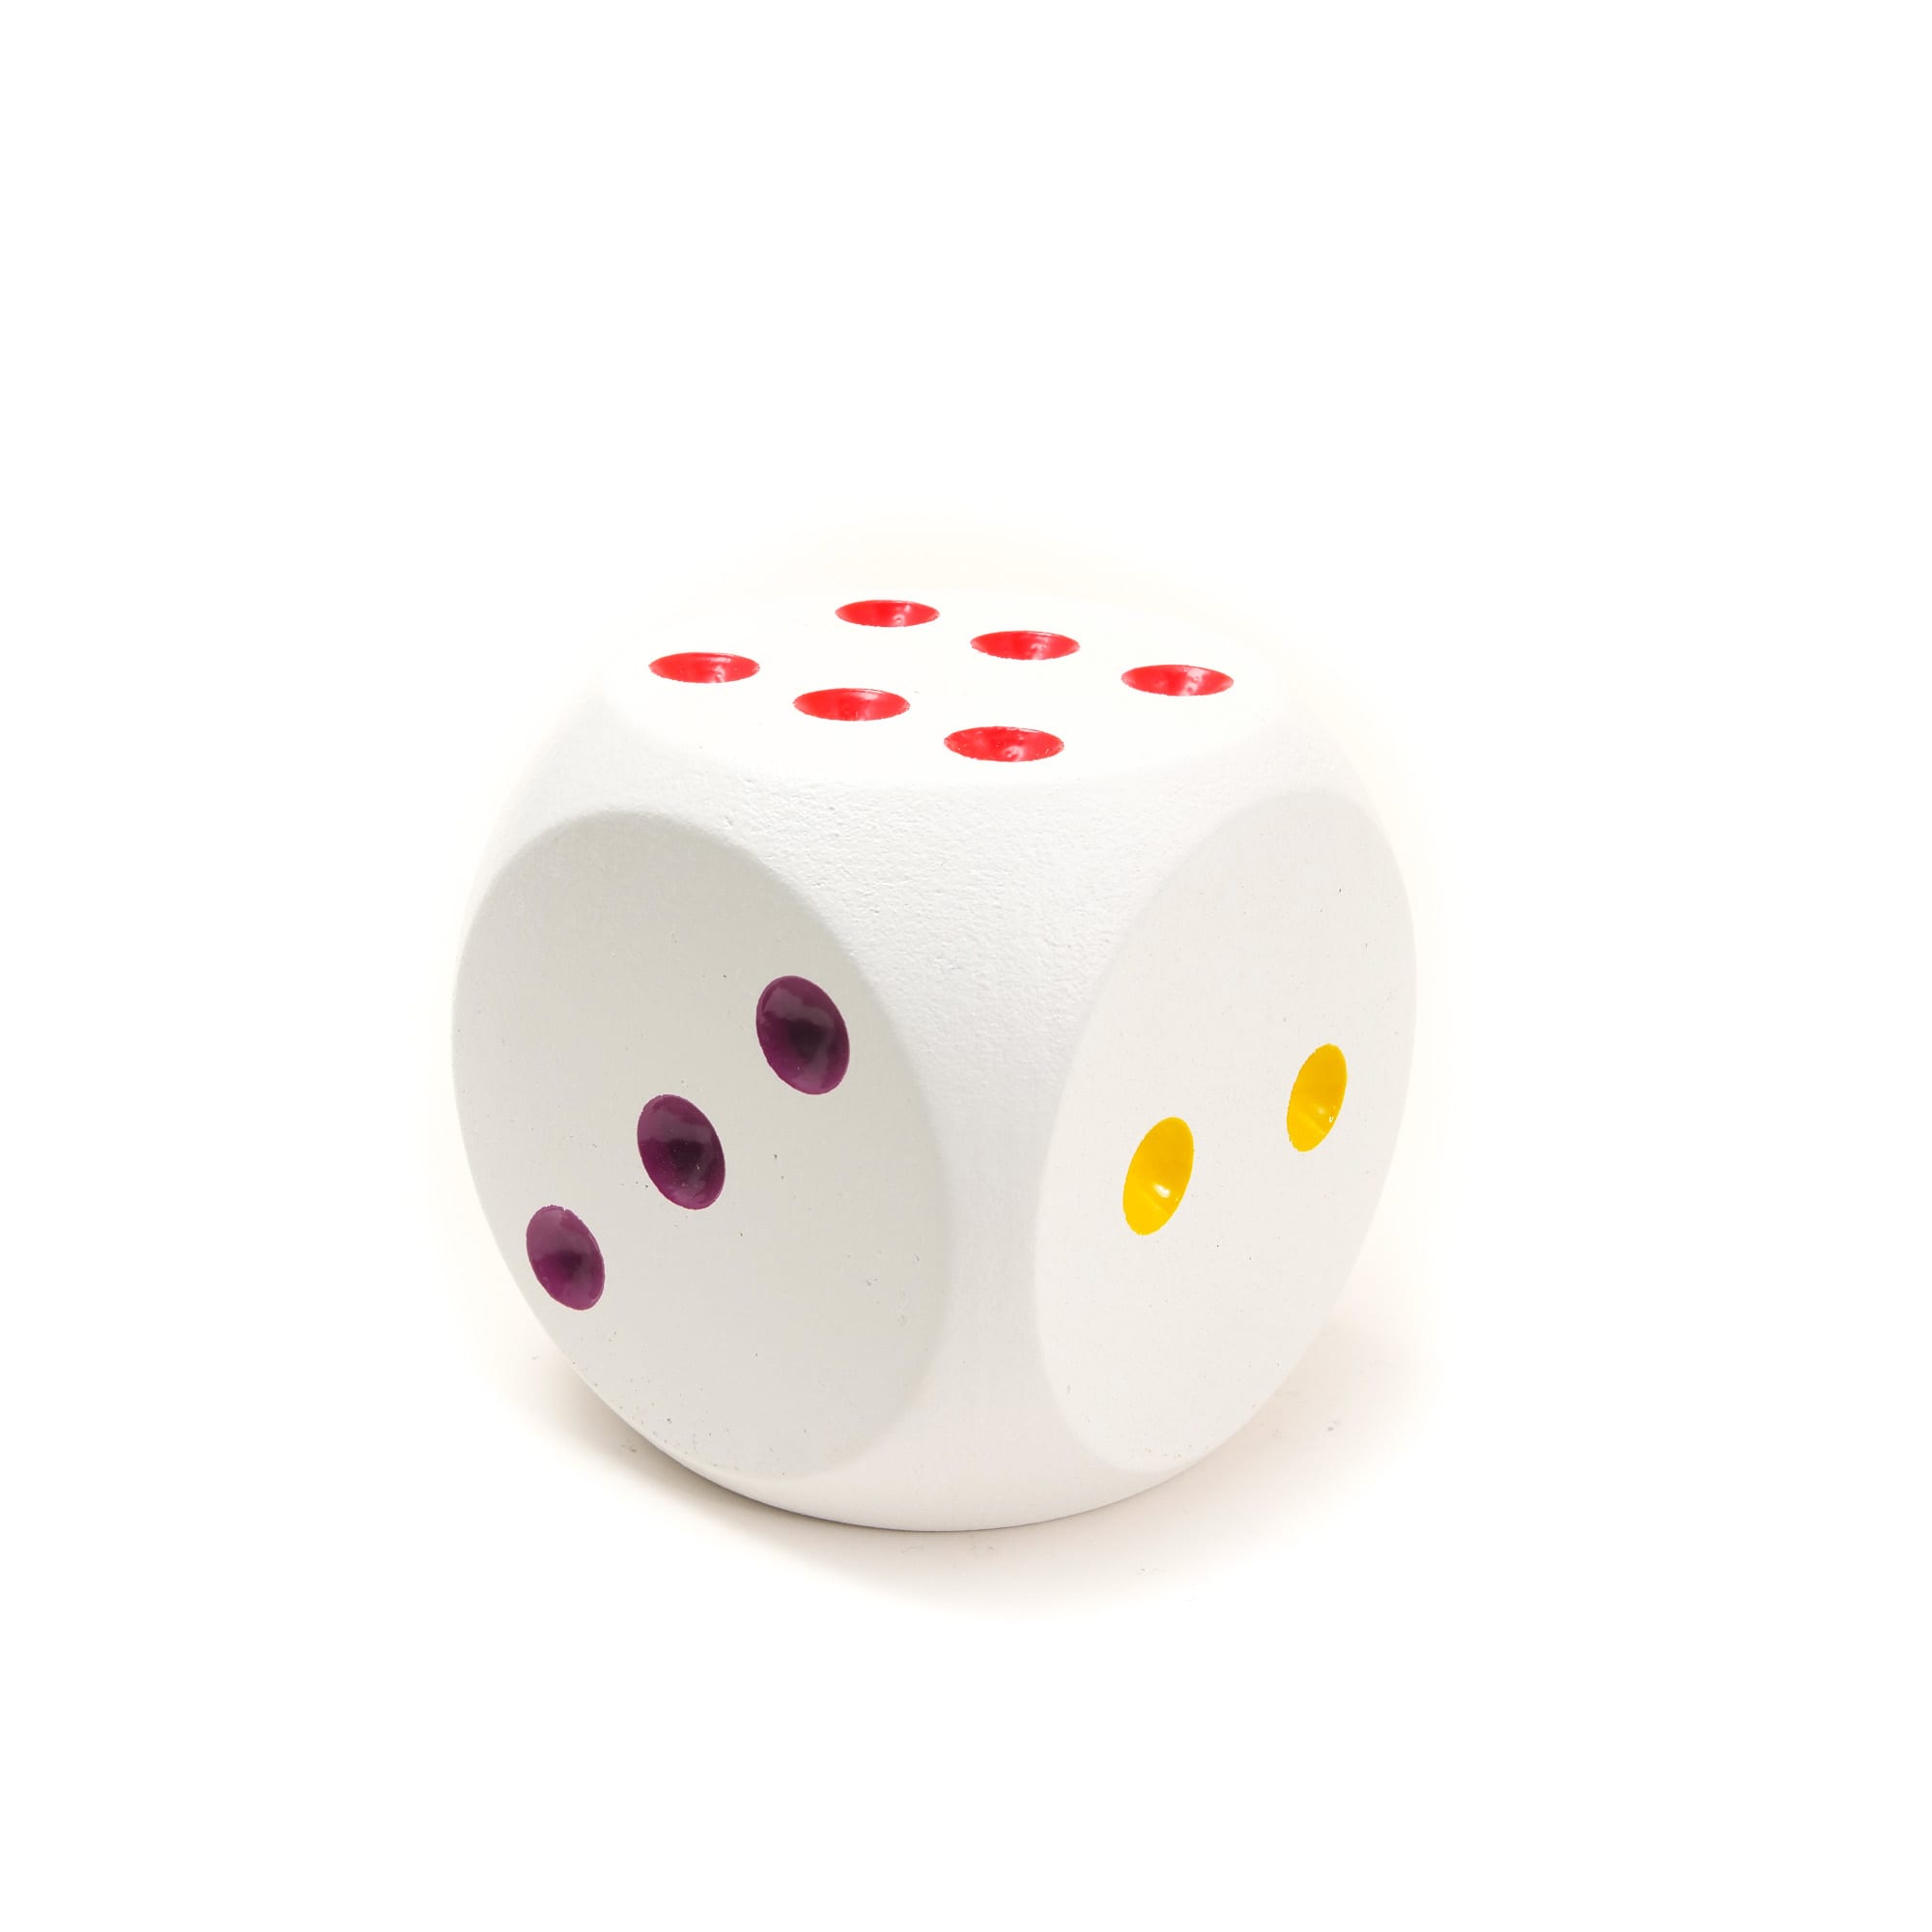 Giant Wooden Color Spot Dice    